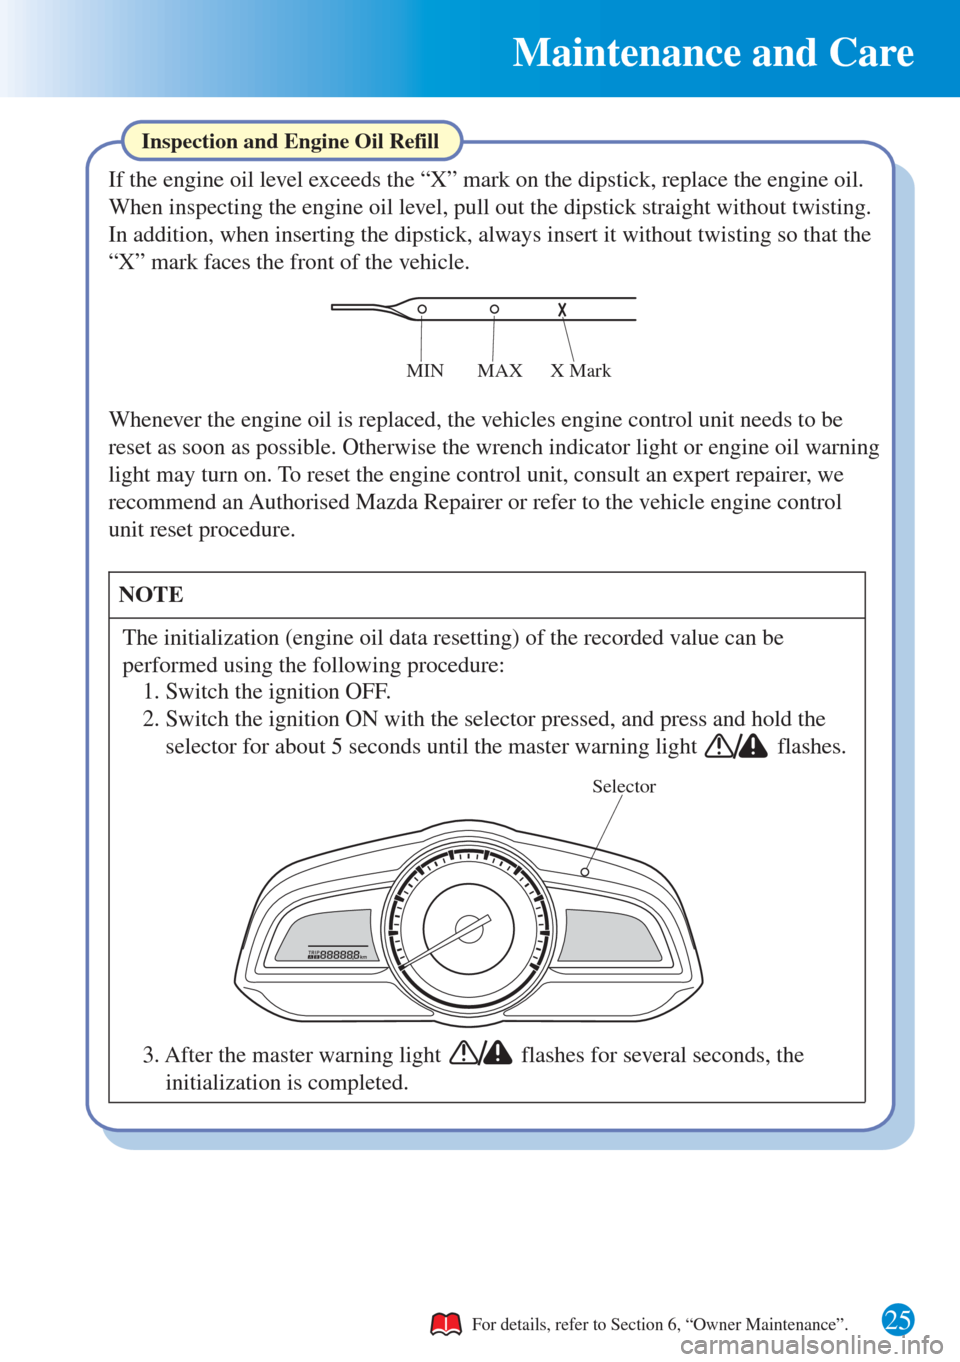 MAZDA MODEL CX-3 2016  Quick Guide (in English) Maintenance and Care
25
Inspection and Engine Oil Refill
Selector
If the engine oil level exceeds the “X” mark on the dipstick, replace the engine oil.
When inspecting the engine oil level, pull o